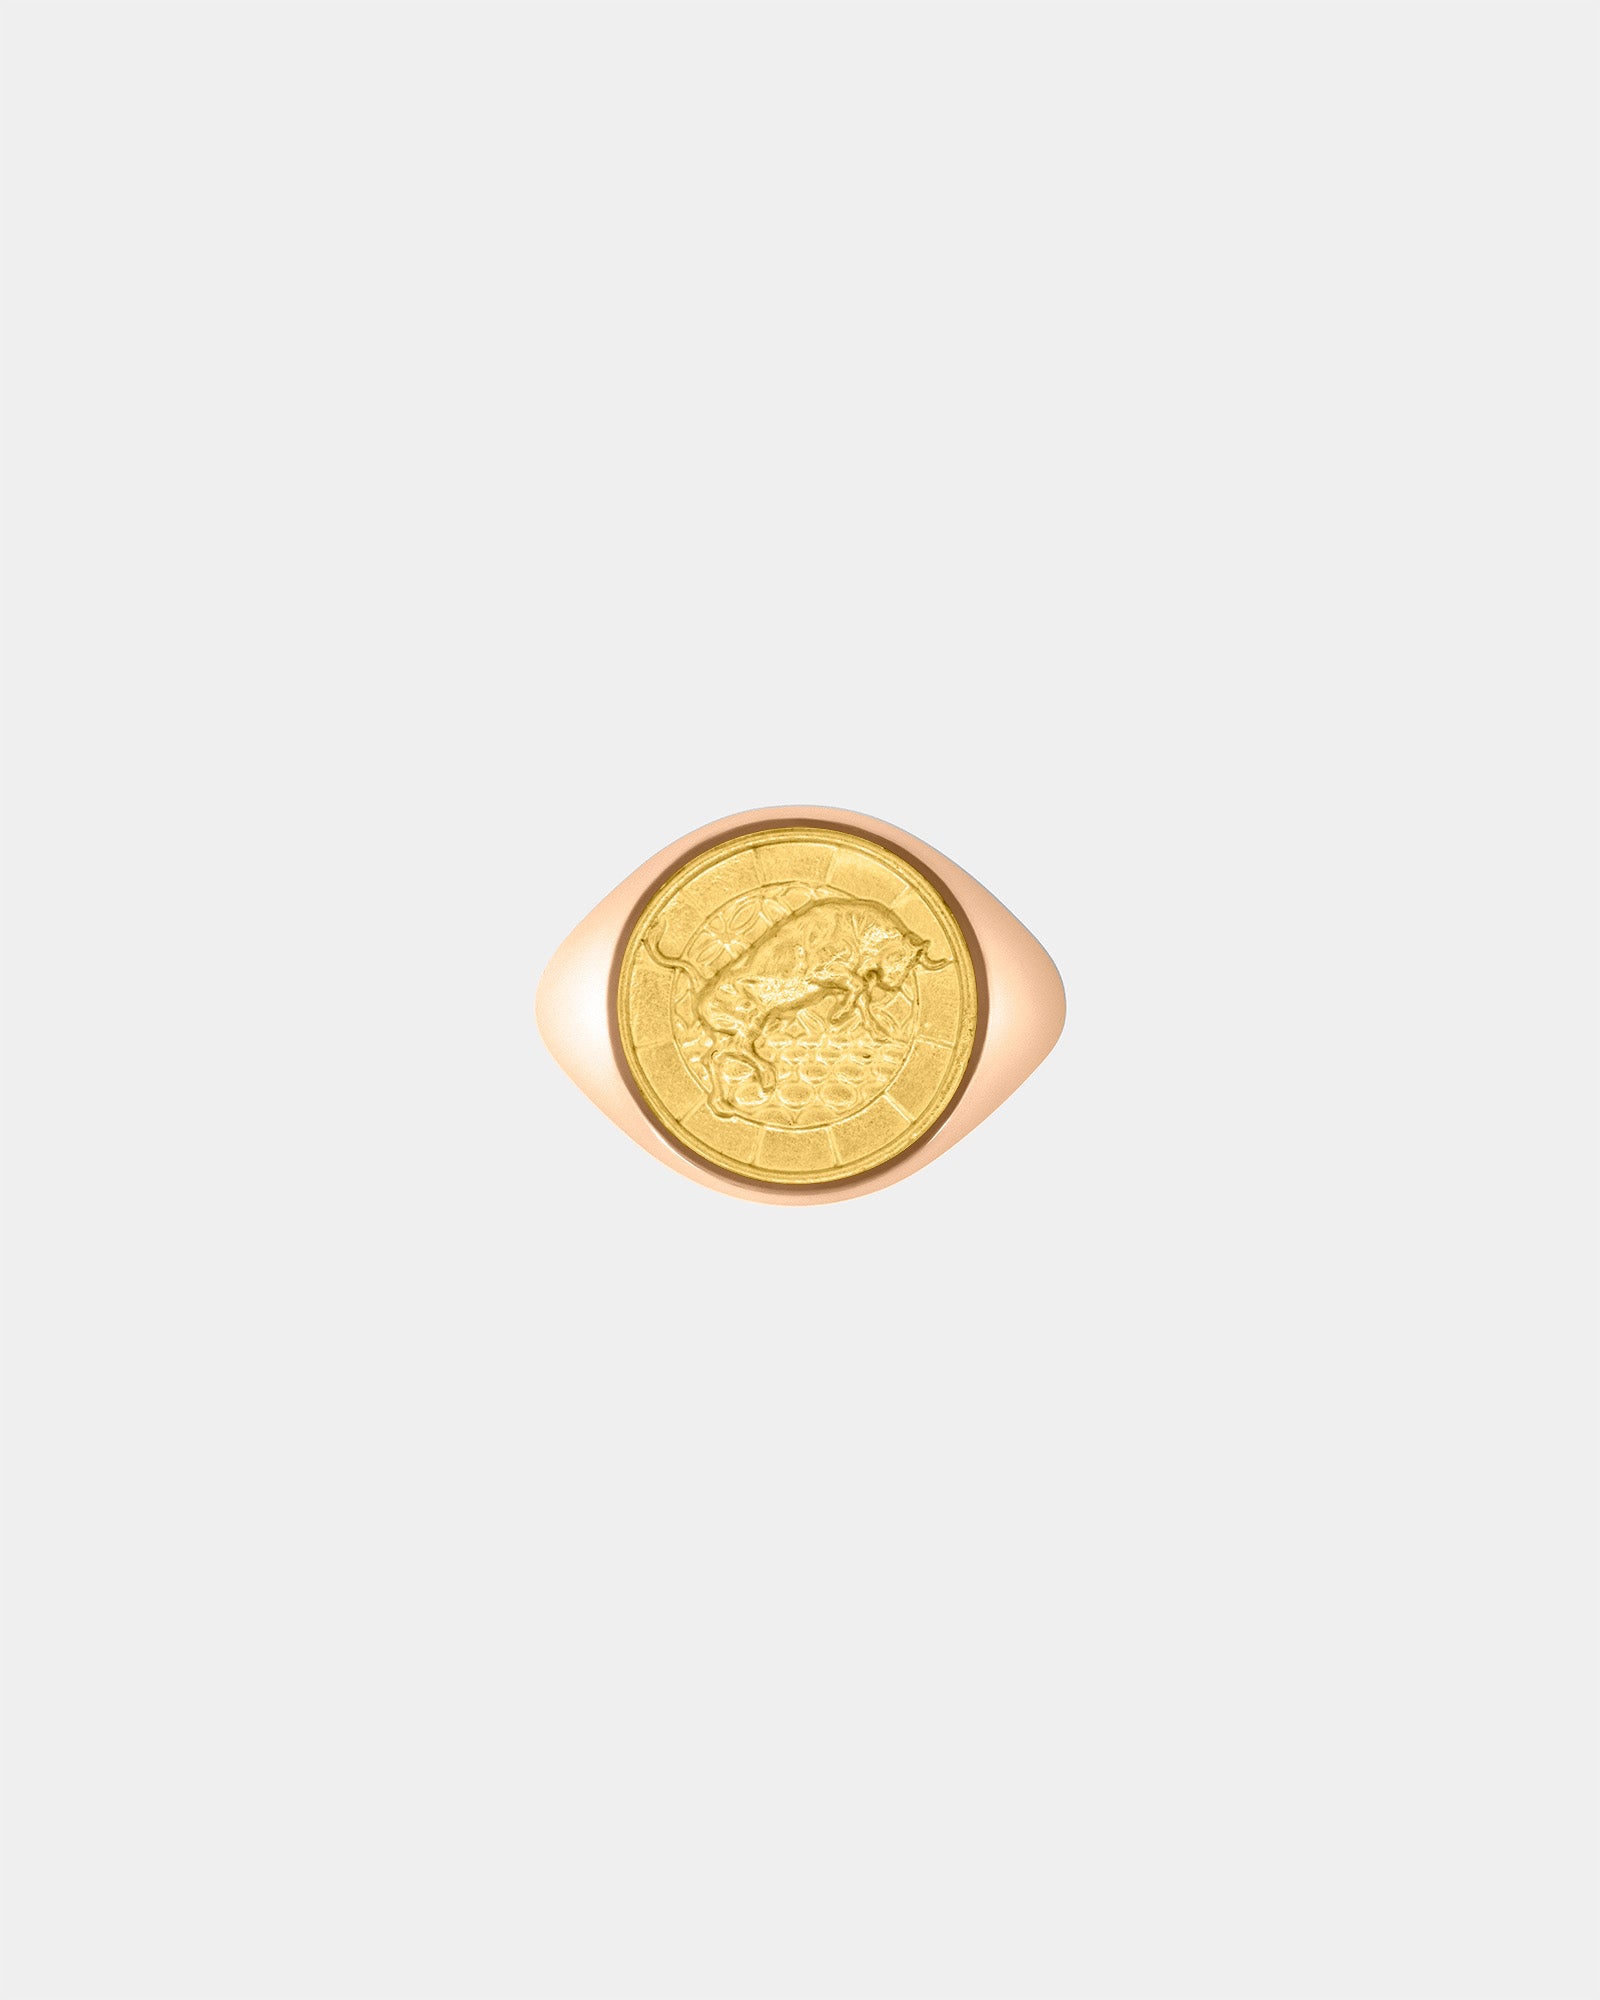 The Bull Large Signet Ring in 9k Rose Gold / 9k Yellow Gold by Wilson Grant